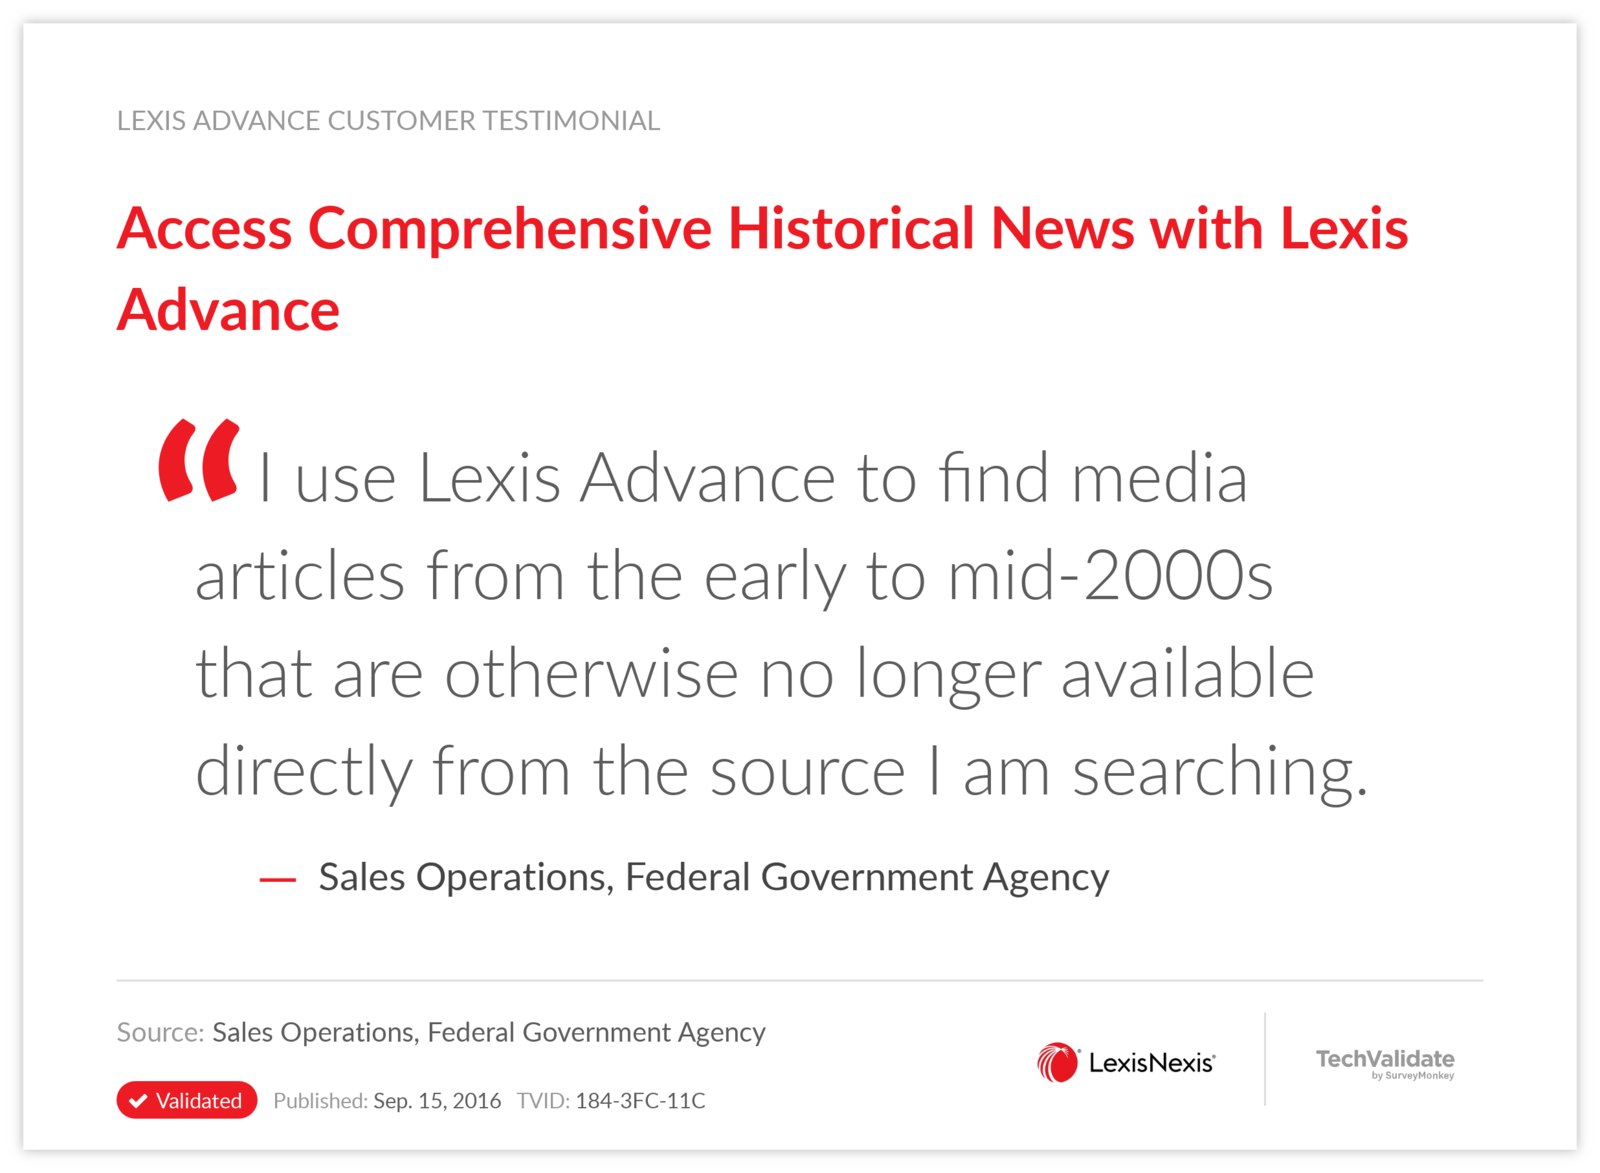 Access Comprehensive Historical News with Lexis Advance